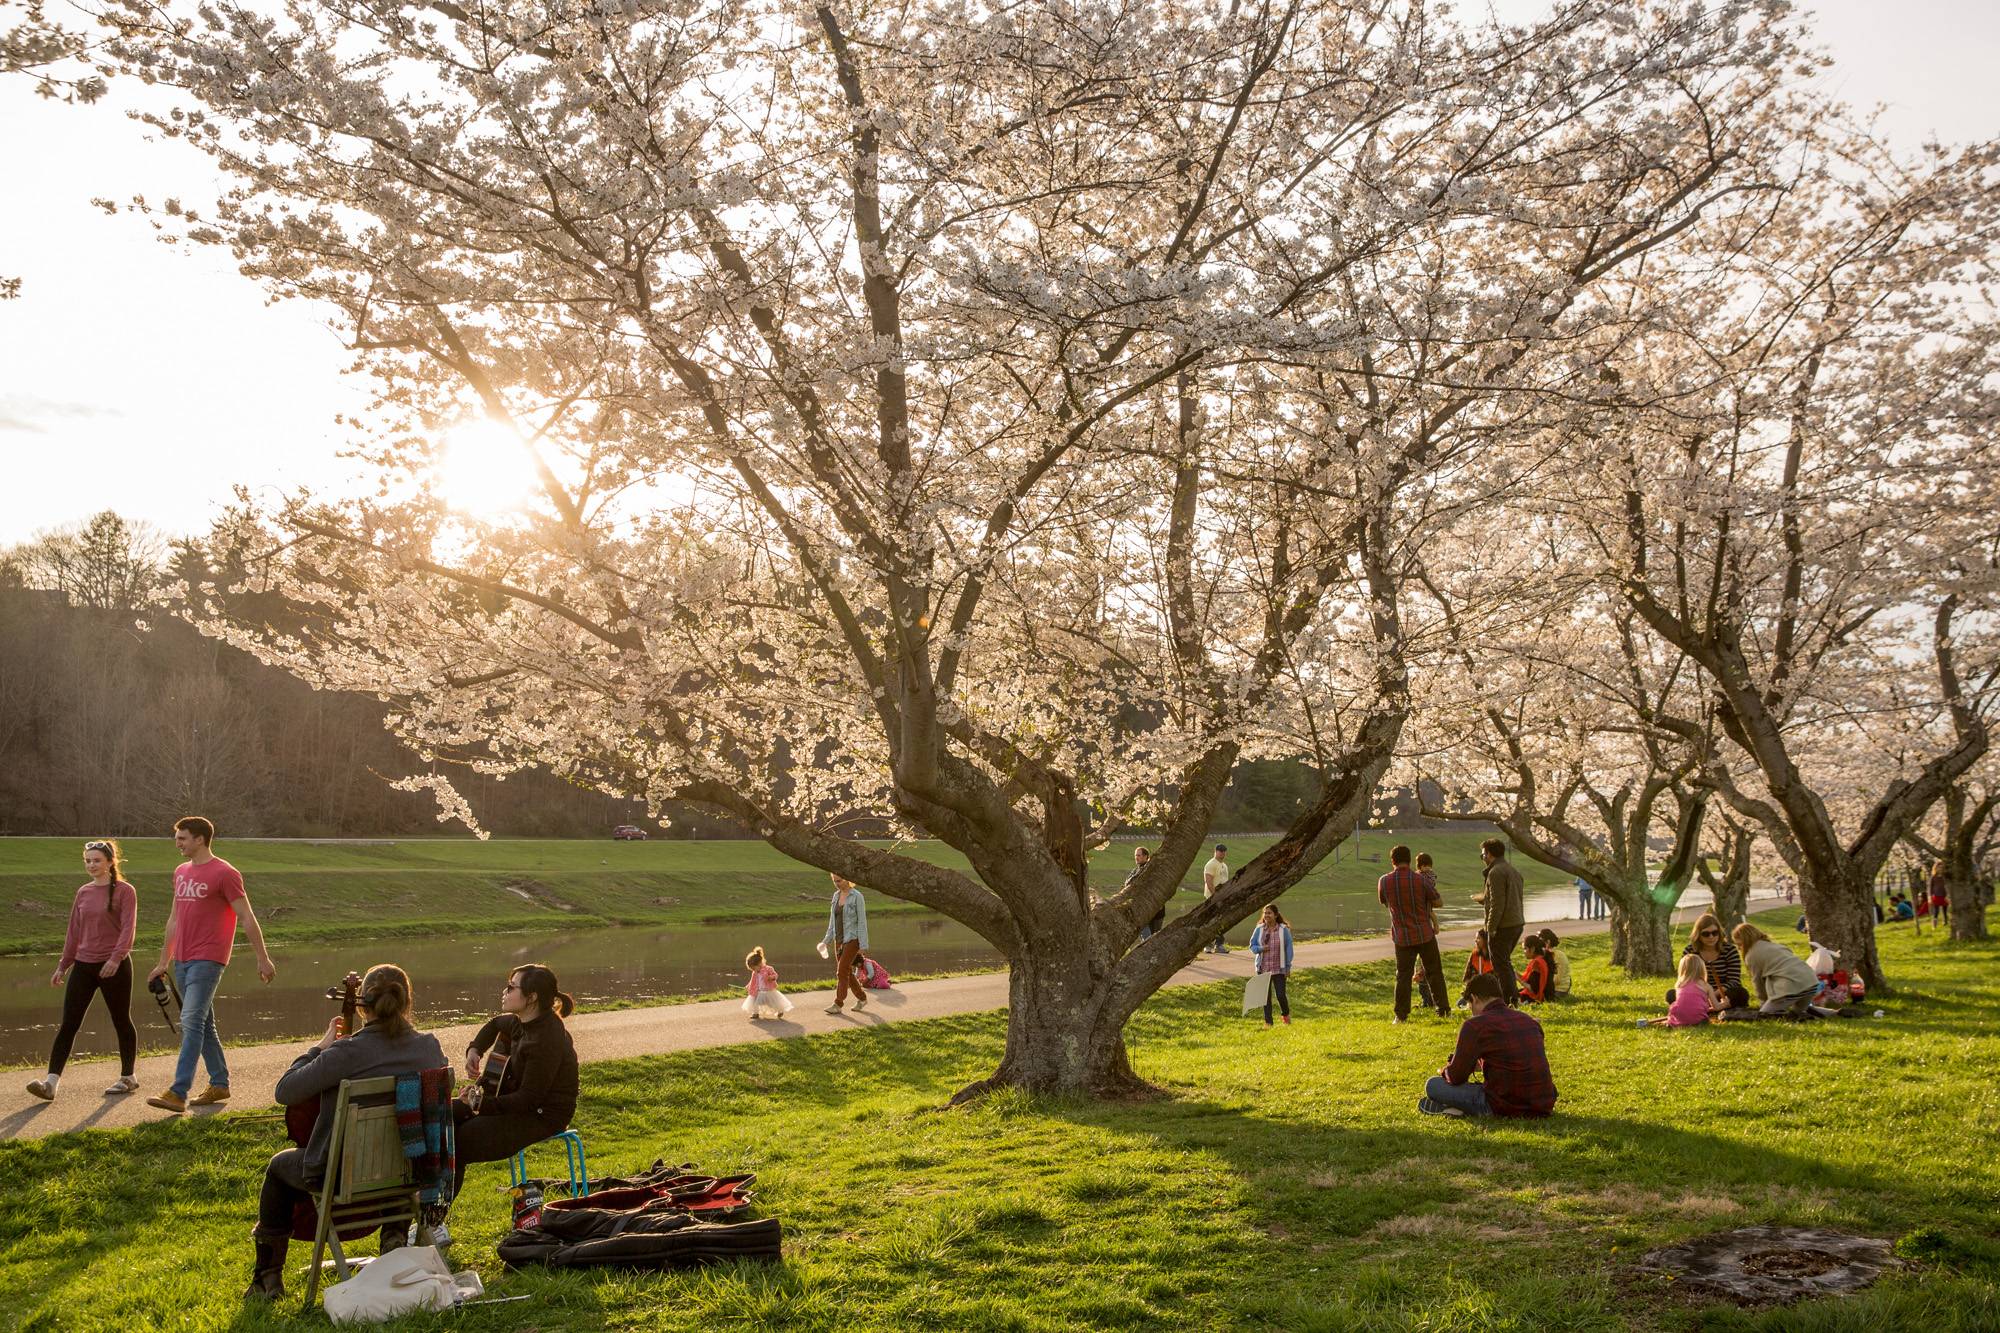 Photographs of the Japanese cherry blossom trees at Ohio University along the Hocking River in Athens, Ohio. 6. Kayakers paddle at night at Strouds Run State Park, just a few miles from the Ohio University campus. 